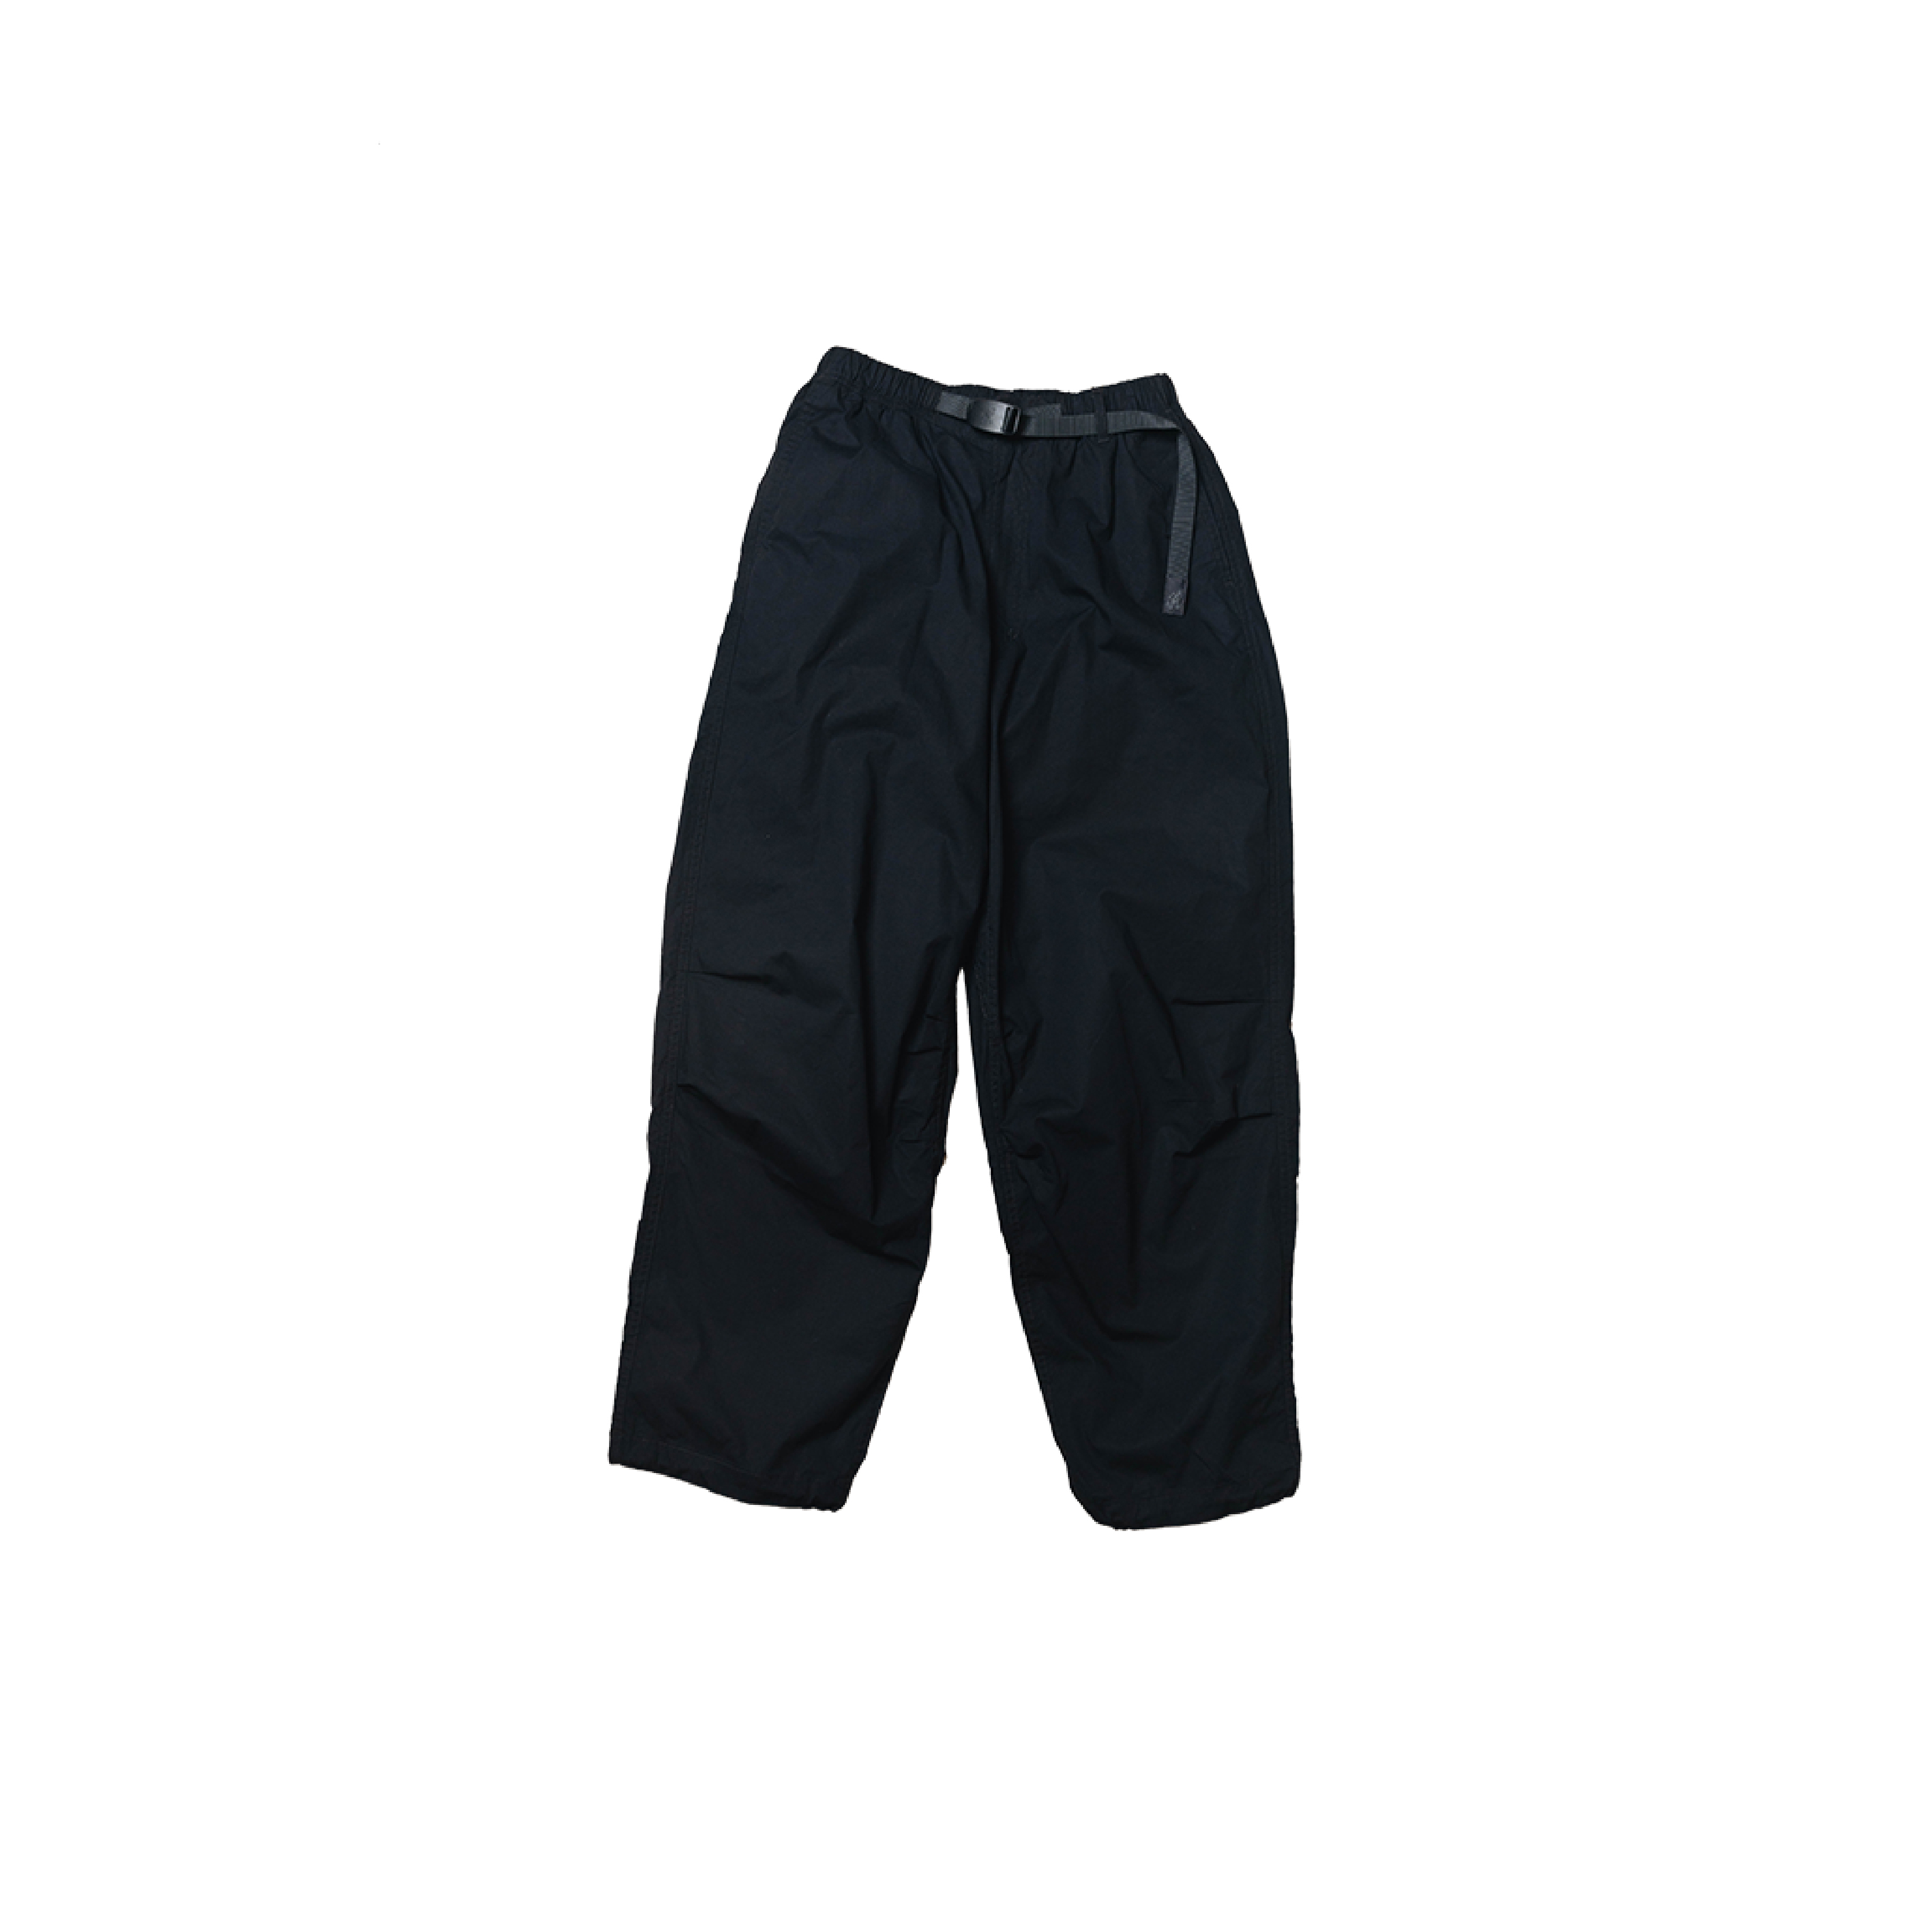 GRAMICCI TAIWAN LIMITED WEATHER STRETCH DARTS PANT 台灣限定